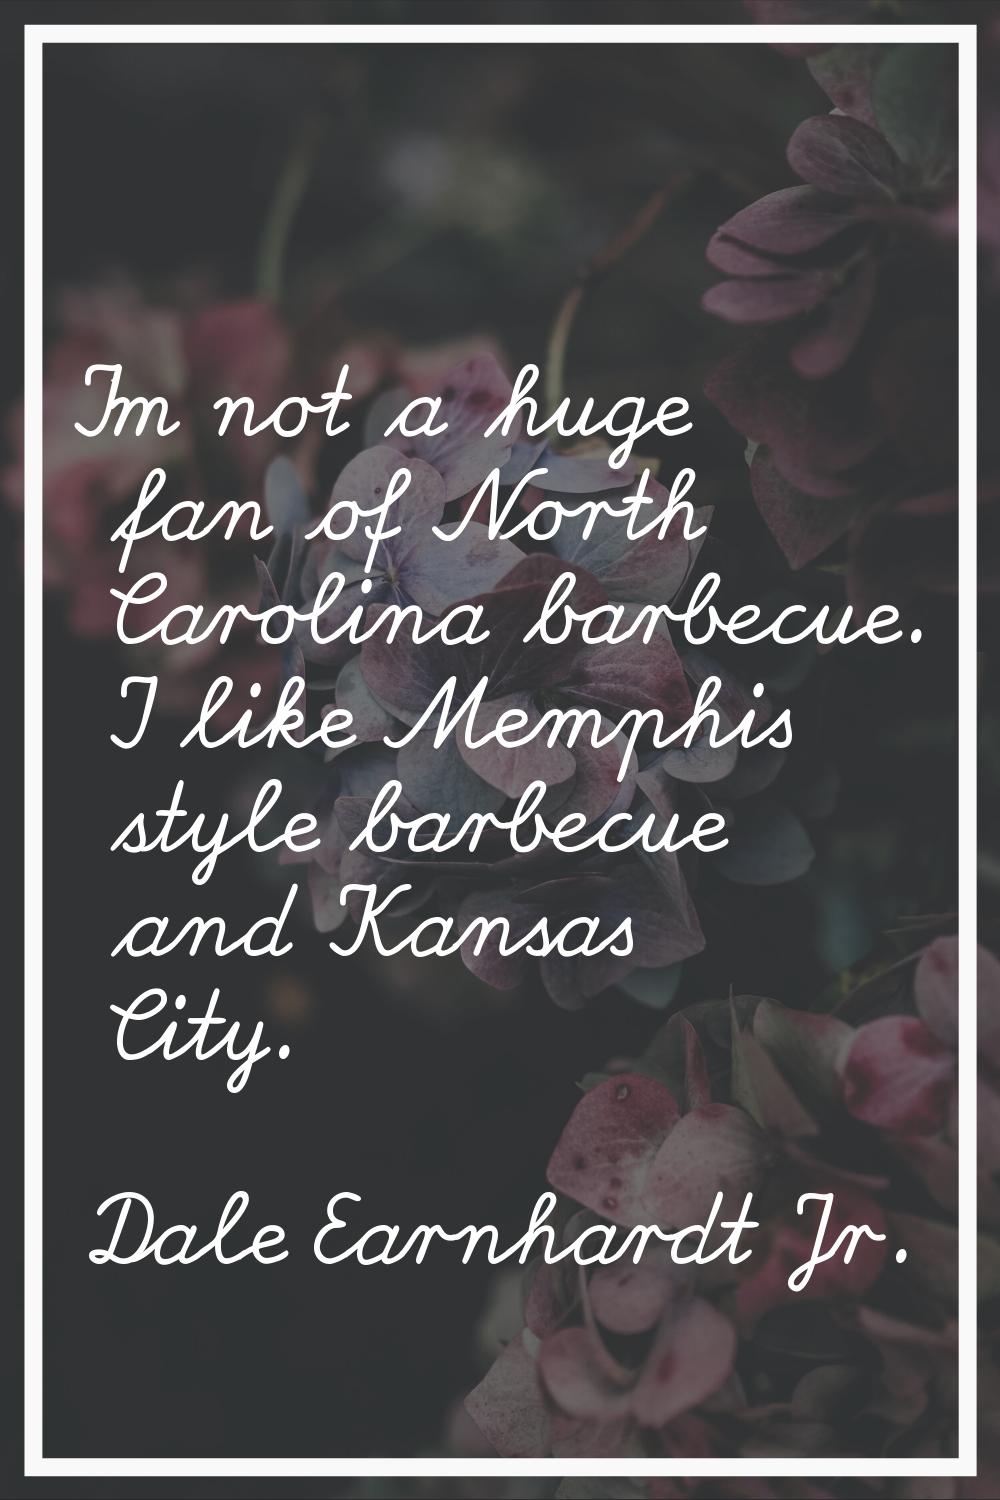 I'm not a huge fan of North Carolina barbecue. I like Memphis style barbecue and Kansas City.